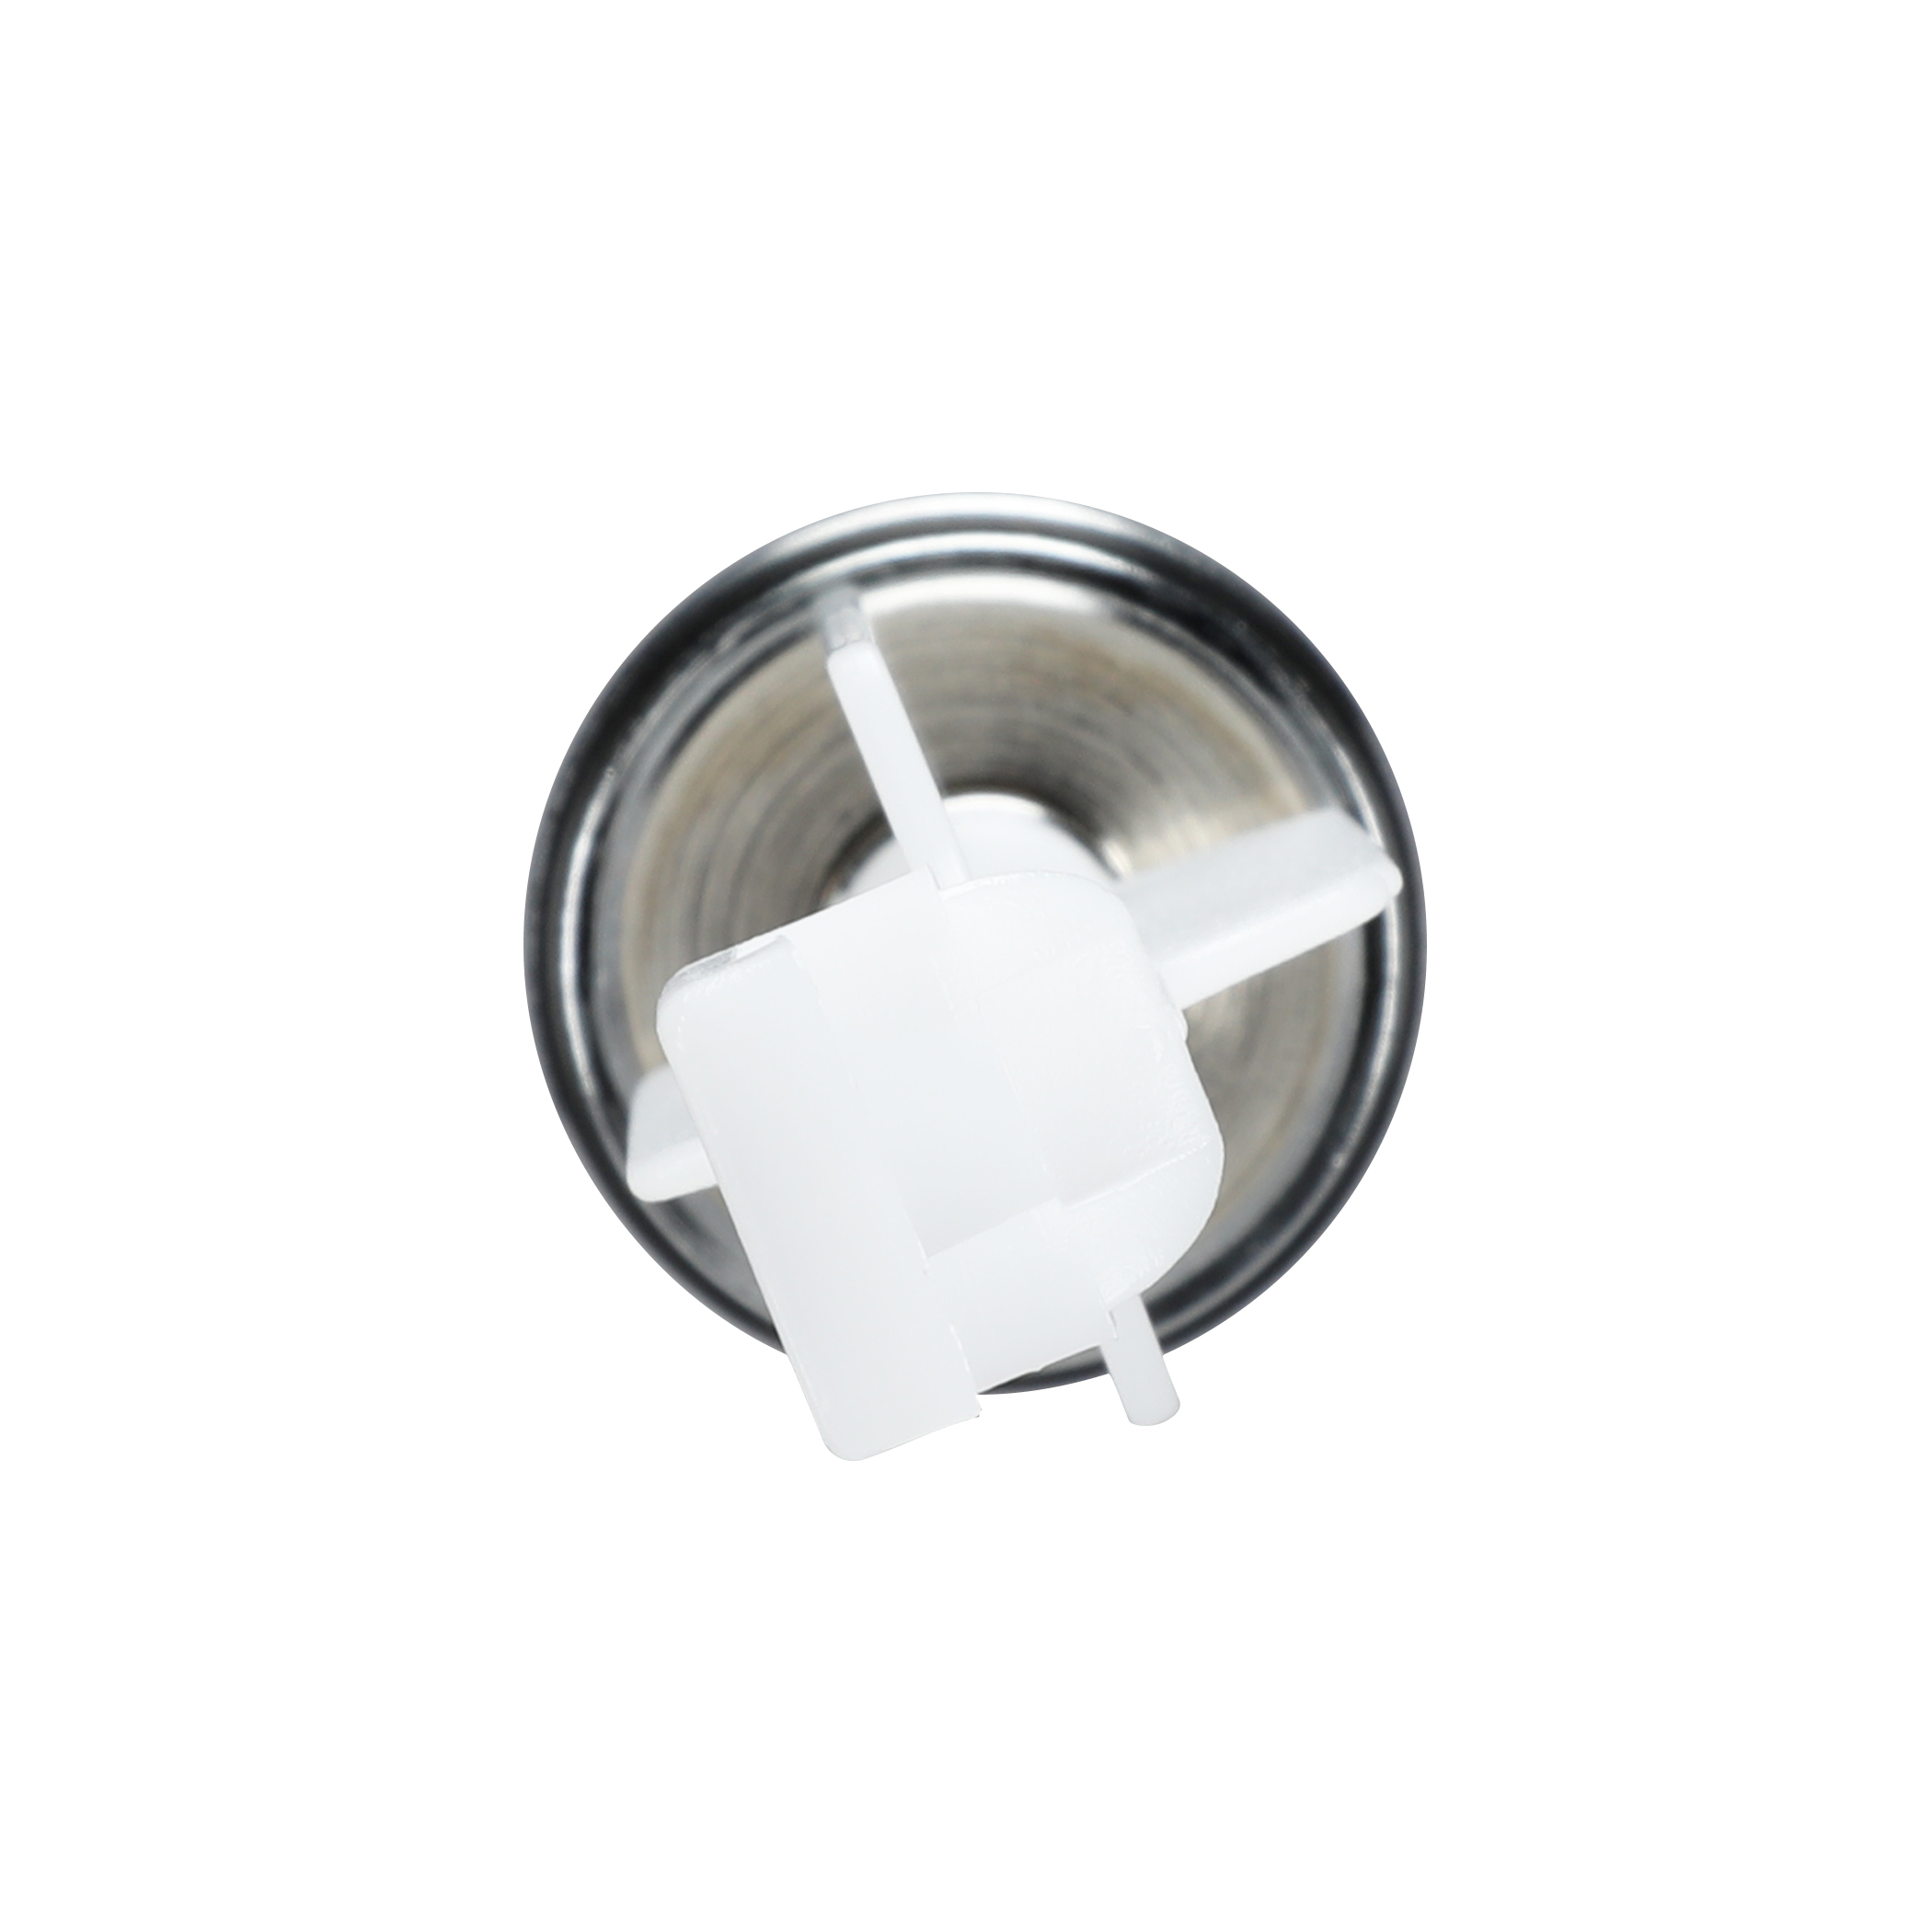 Danco 1.4 in. Chrome Plastic Replacement Pop Up Stopper